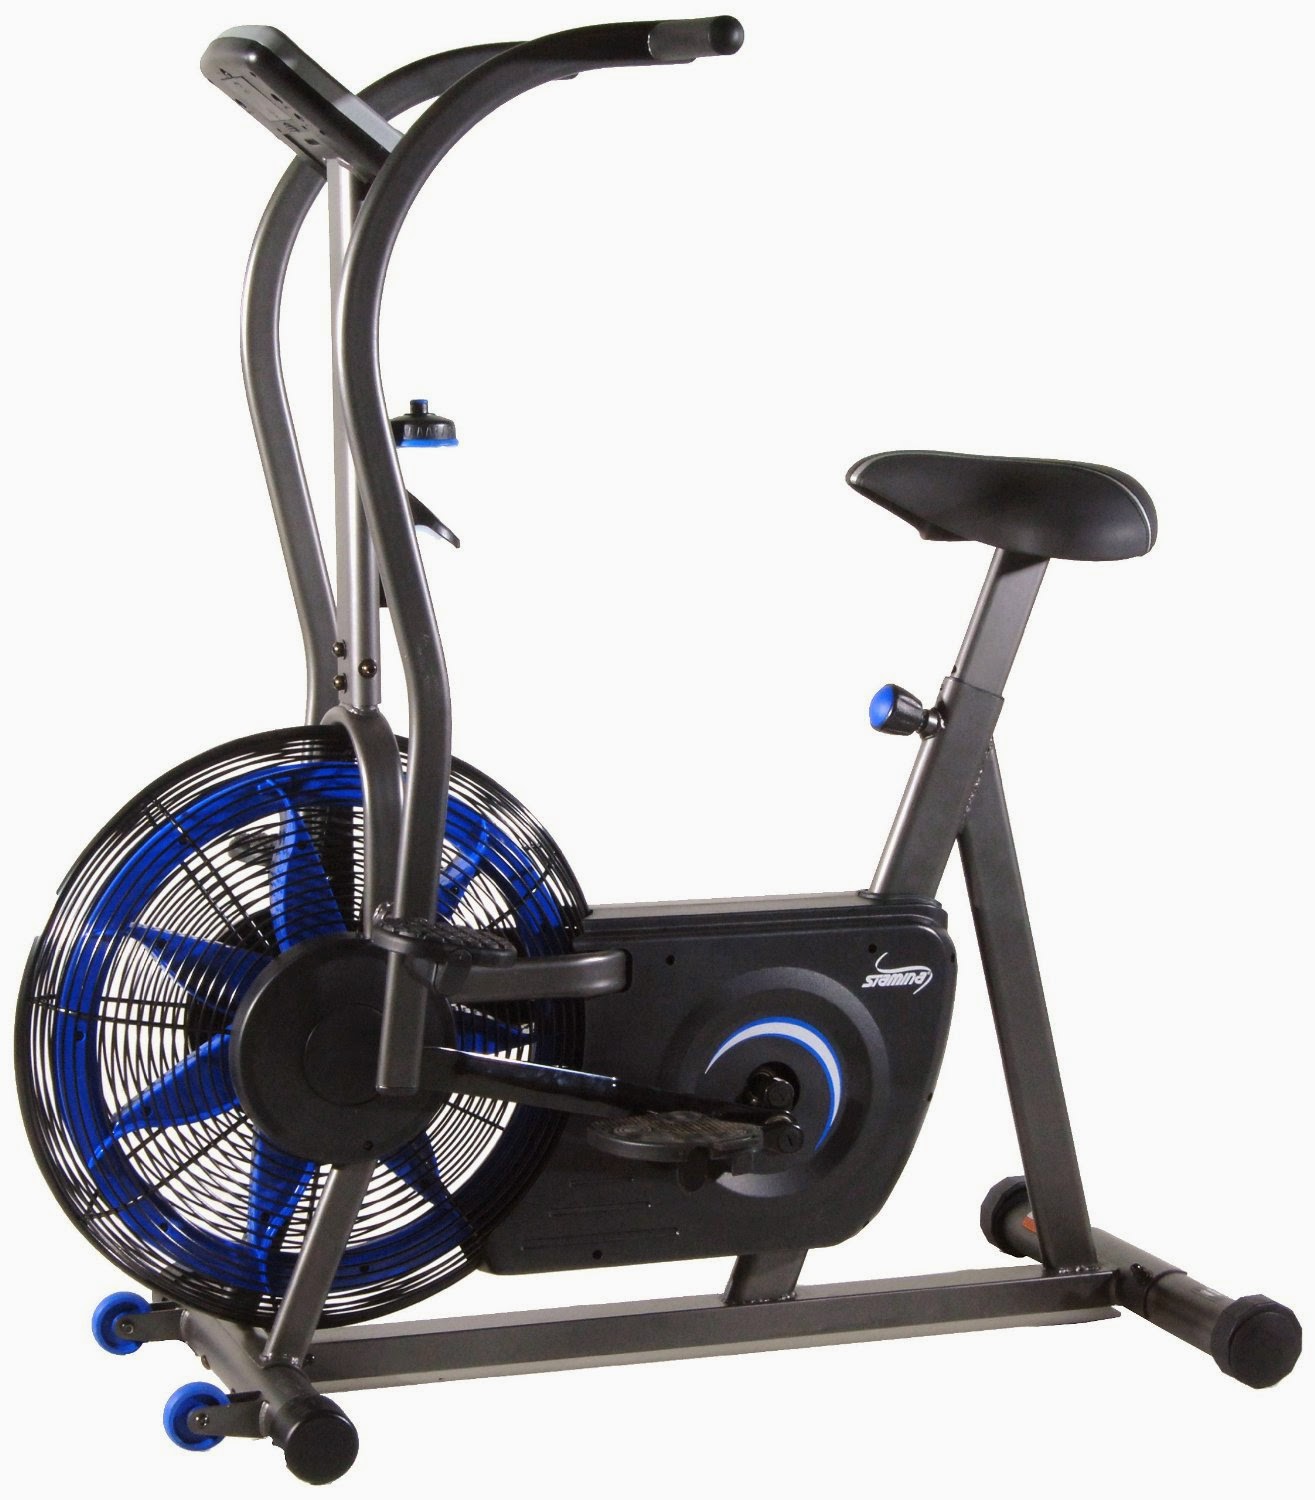 Stamina Airgometer 15-1100A Upright Fan Exercise Bike, review of features, unlimited air resistance & dual action handlebars